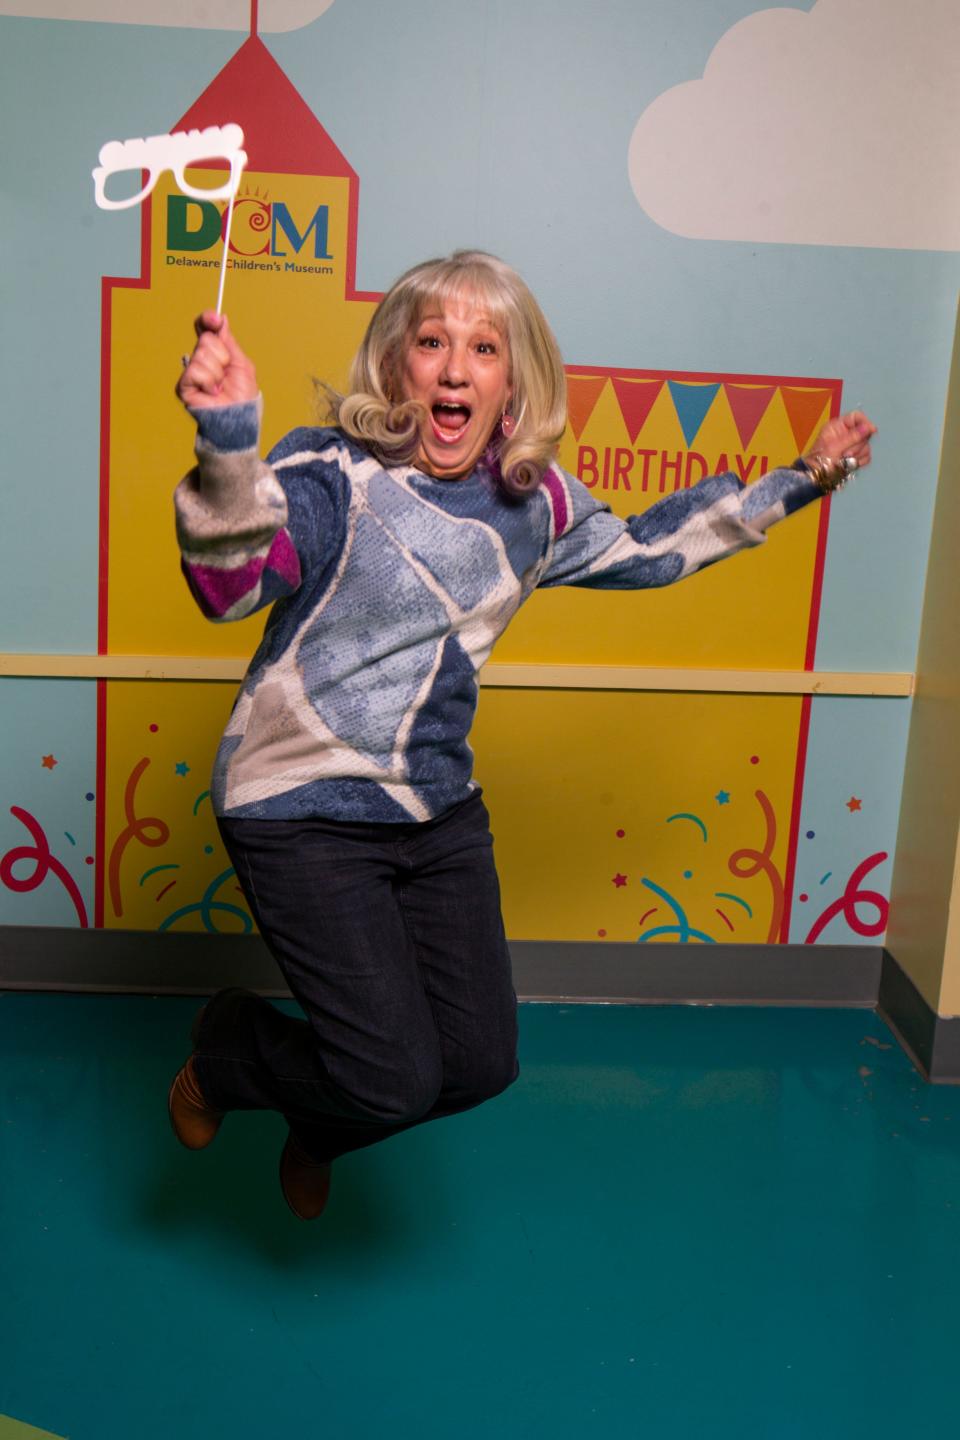 Kathleen Wilson is seeing her 16th Leap Day birthday. She's photographed at the Delaware Children's Museum.